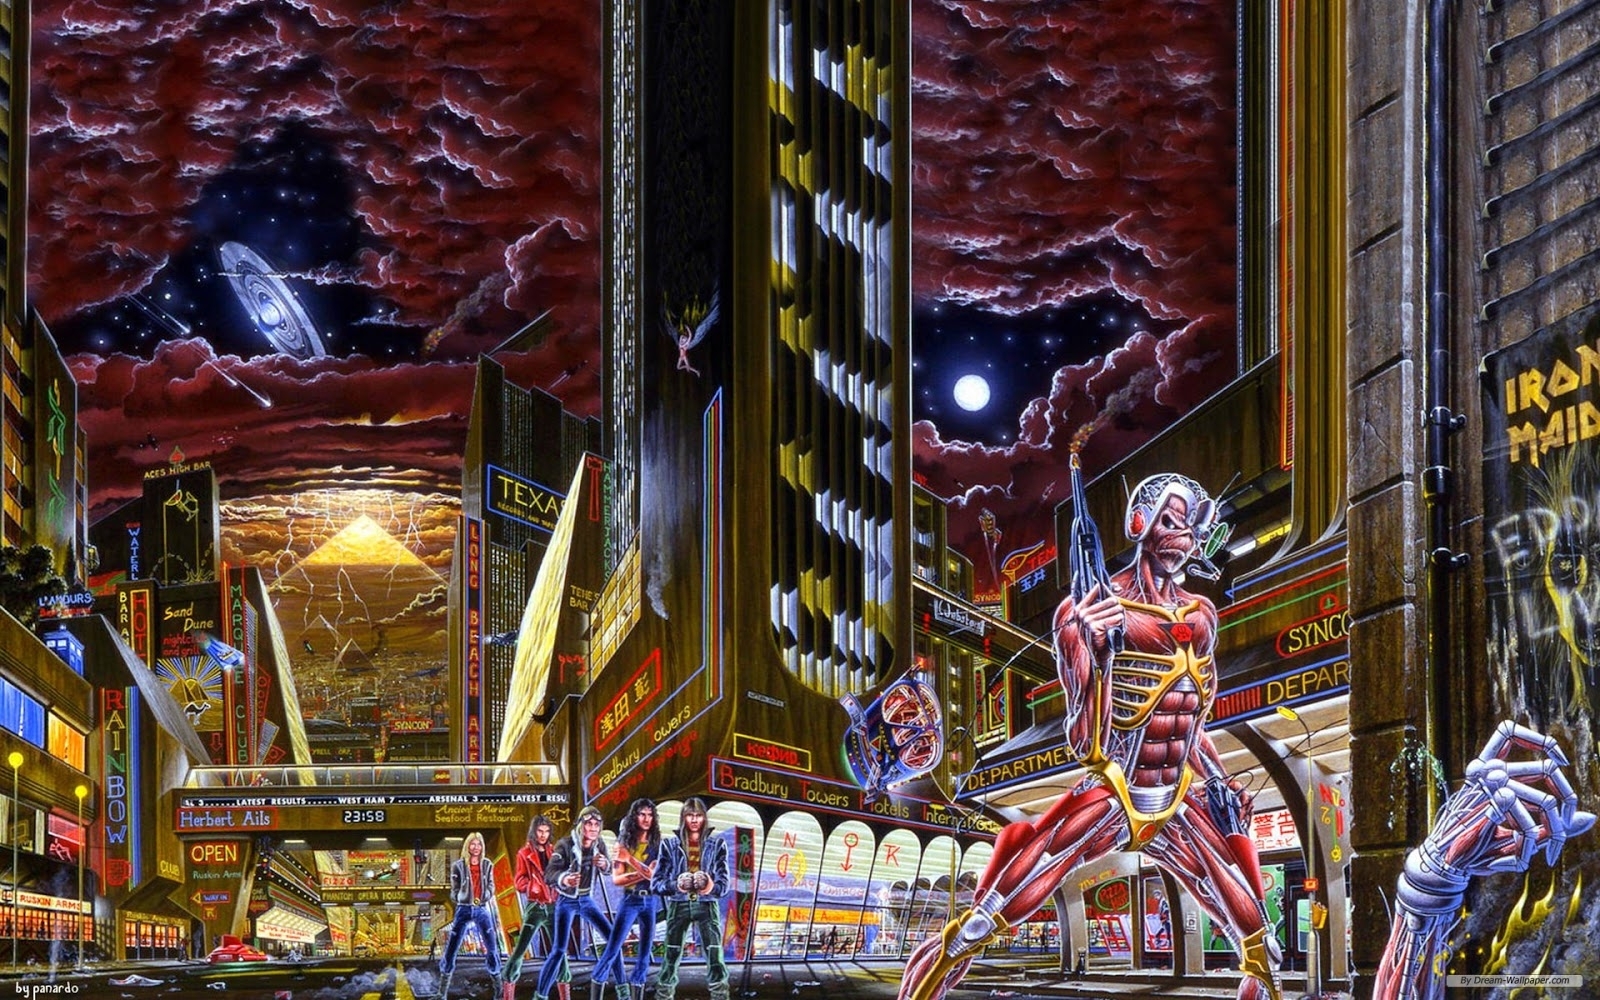 10 New Iron Maiden Somewhere In Time Wallpaper FULL HD 1080p For PC Desktop